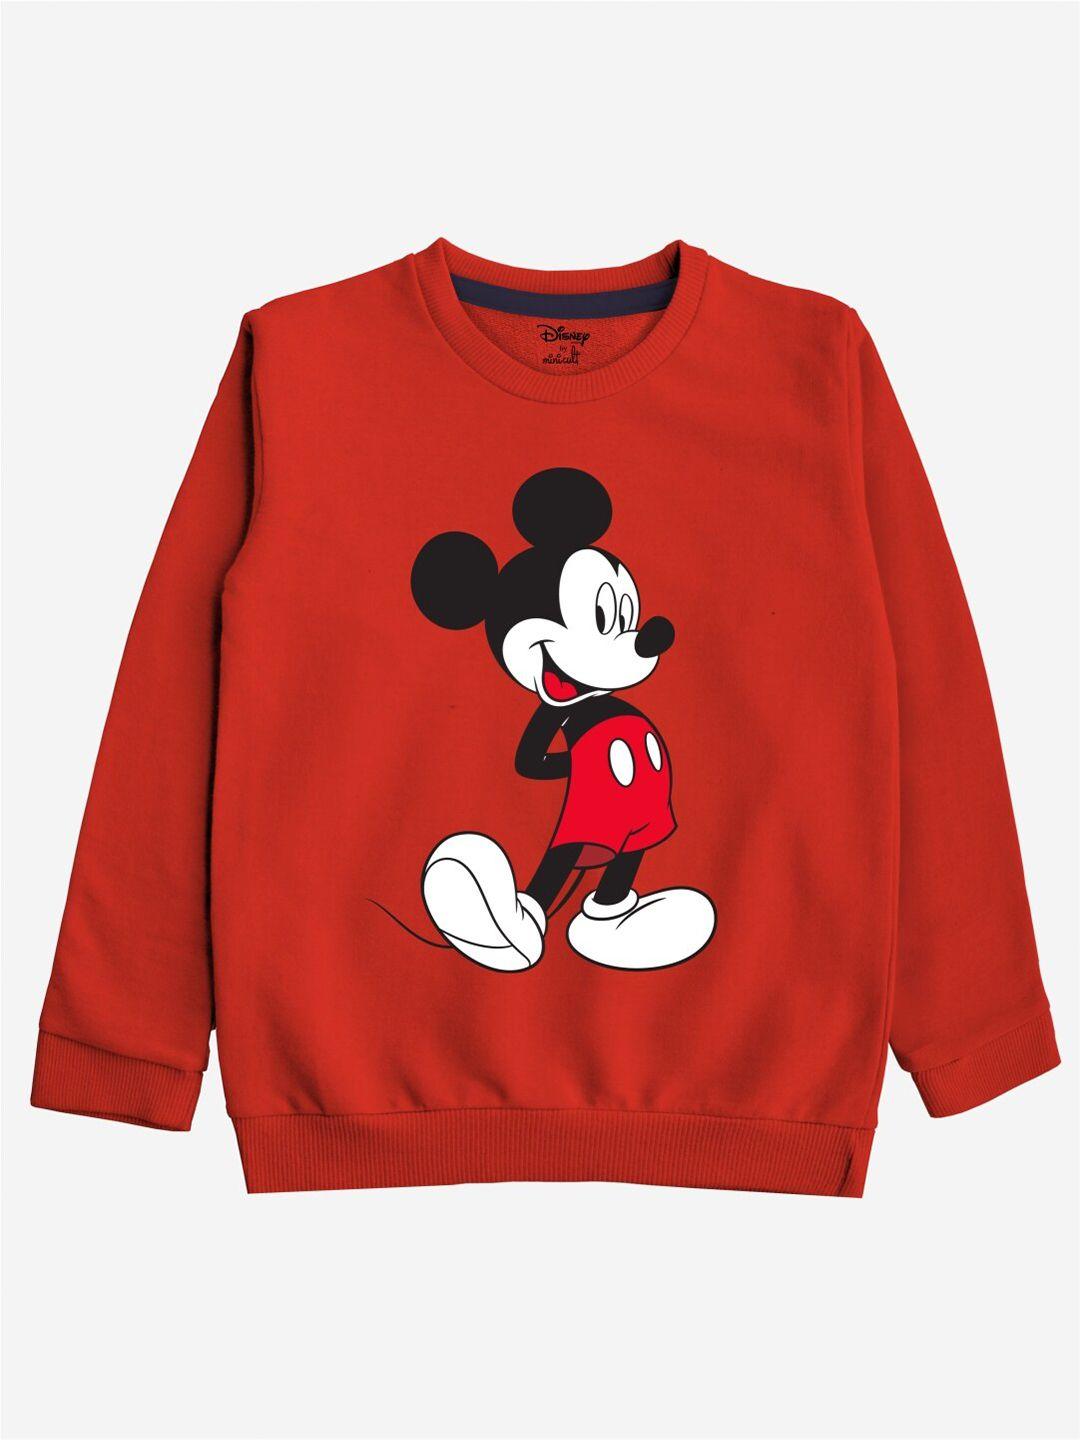 minicult kids red mickey mouse printed sweatshirt